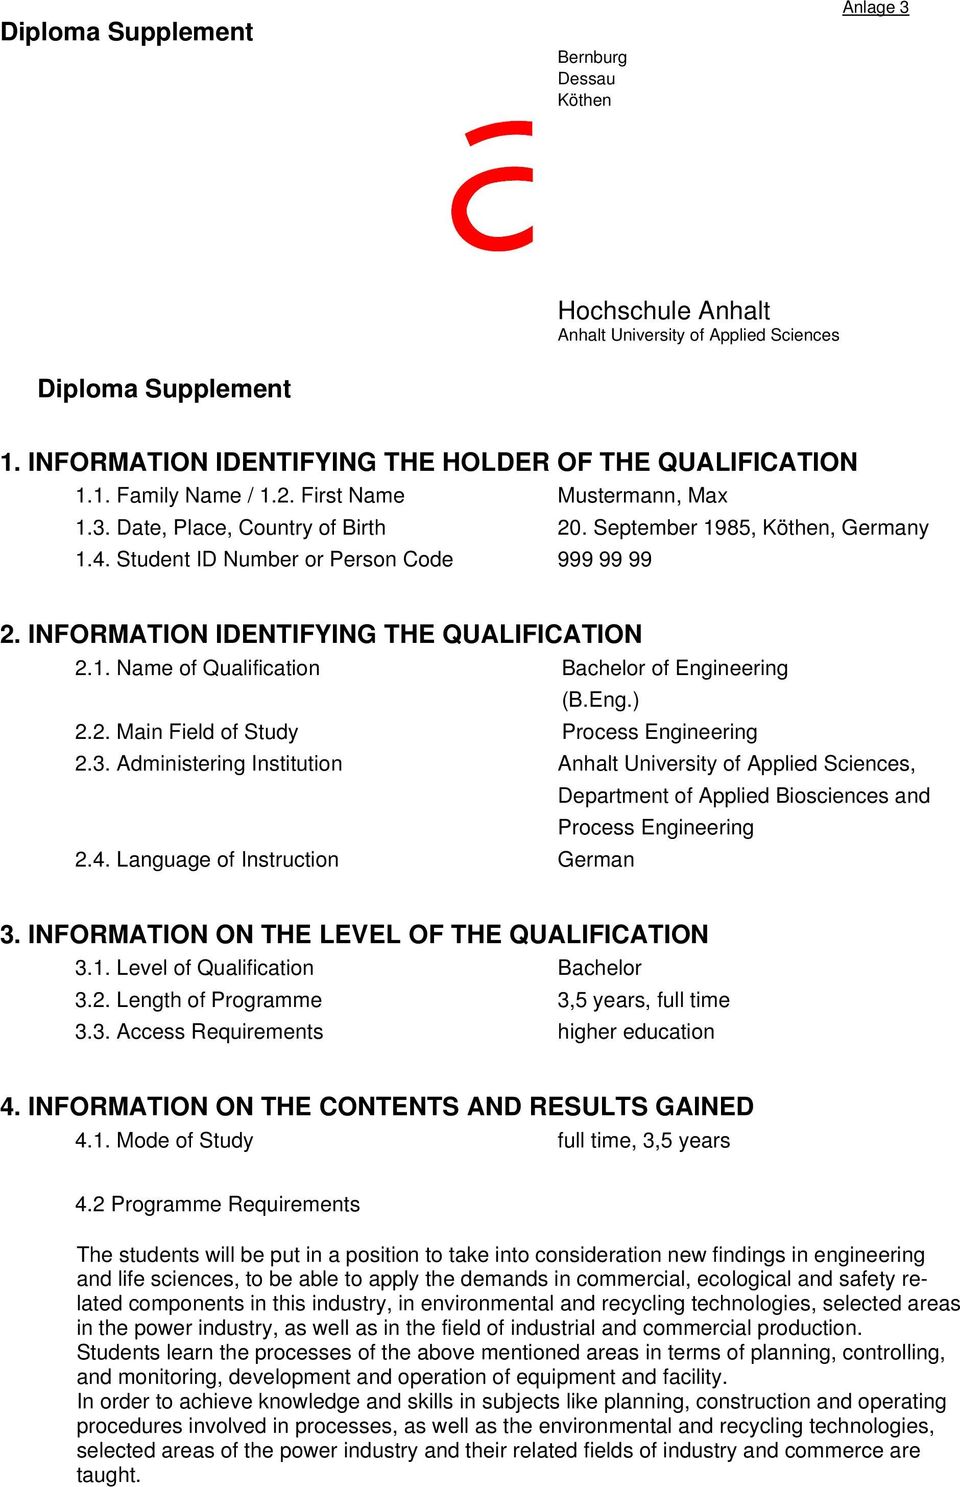 Eng.) 2.2. Main Field of Study Process Engineering 2.3. Administering Institution Anhalt University of Applied Sciences, Department of Applied Biosciences and Process Engineering 2.4.